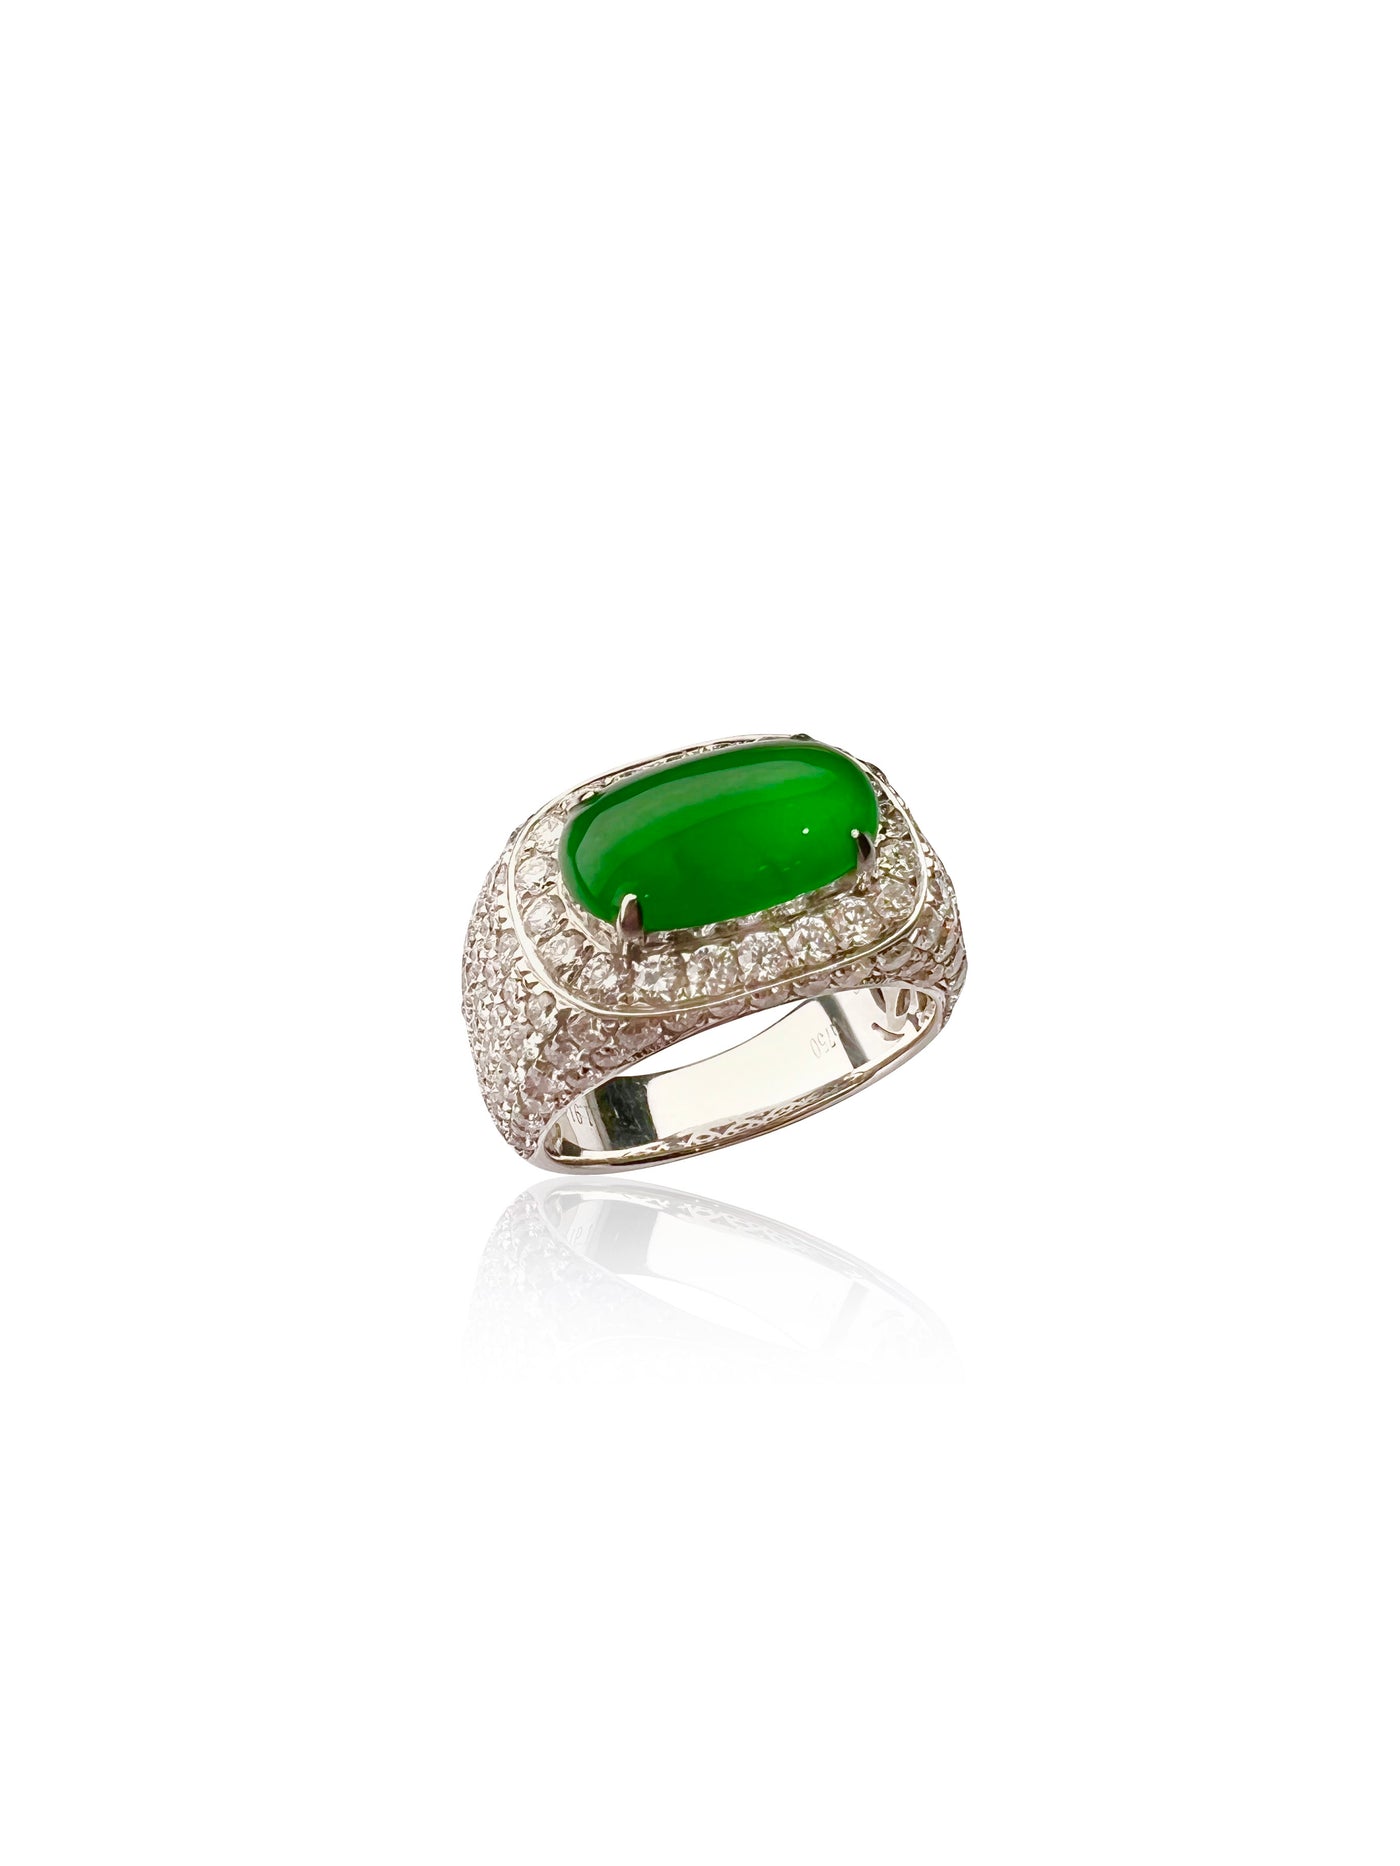 Jadeite Cabochon Ring in 18K White Gold With Diamonds